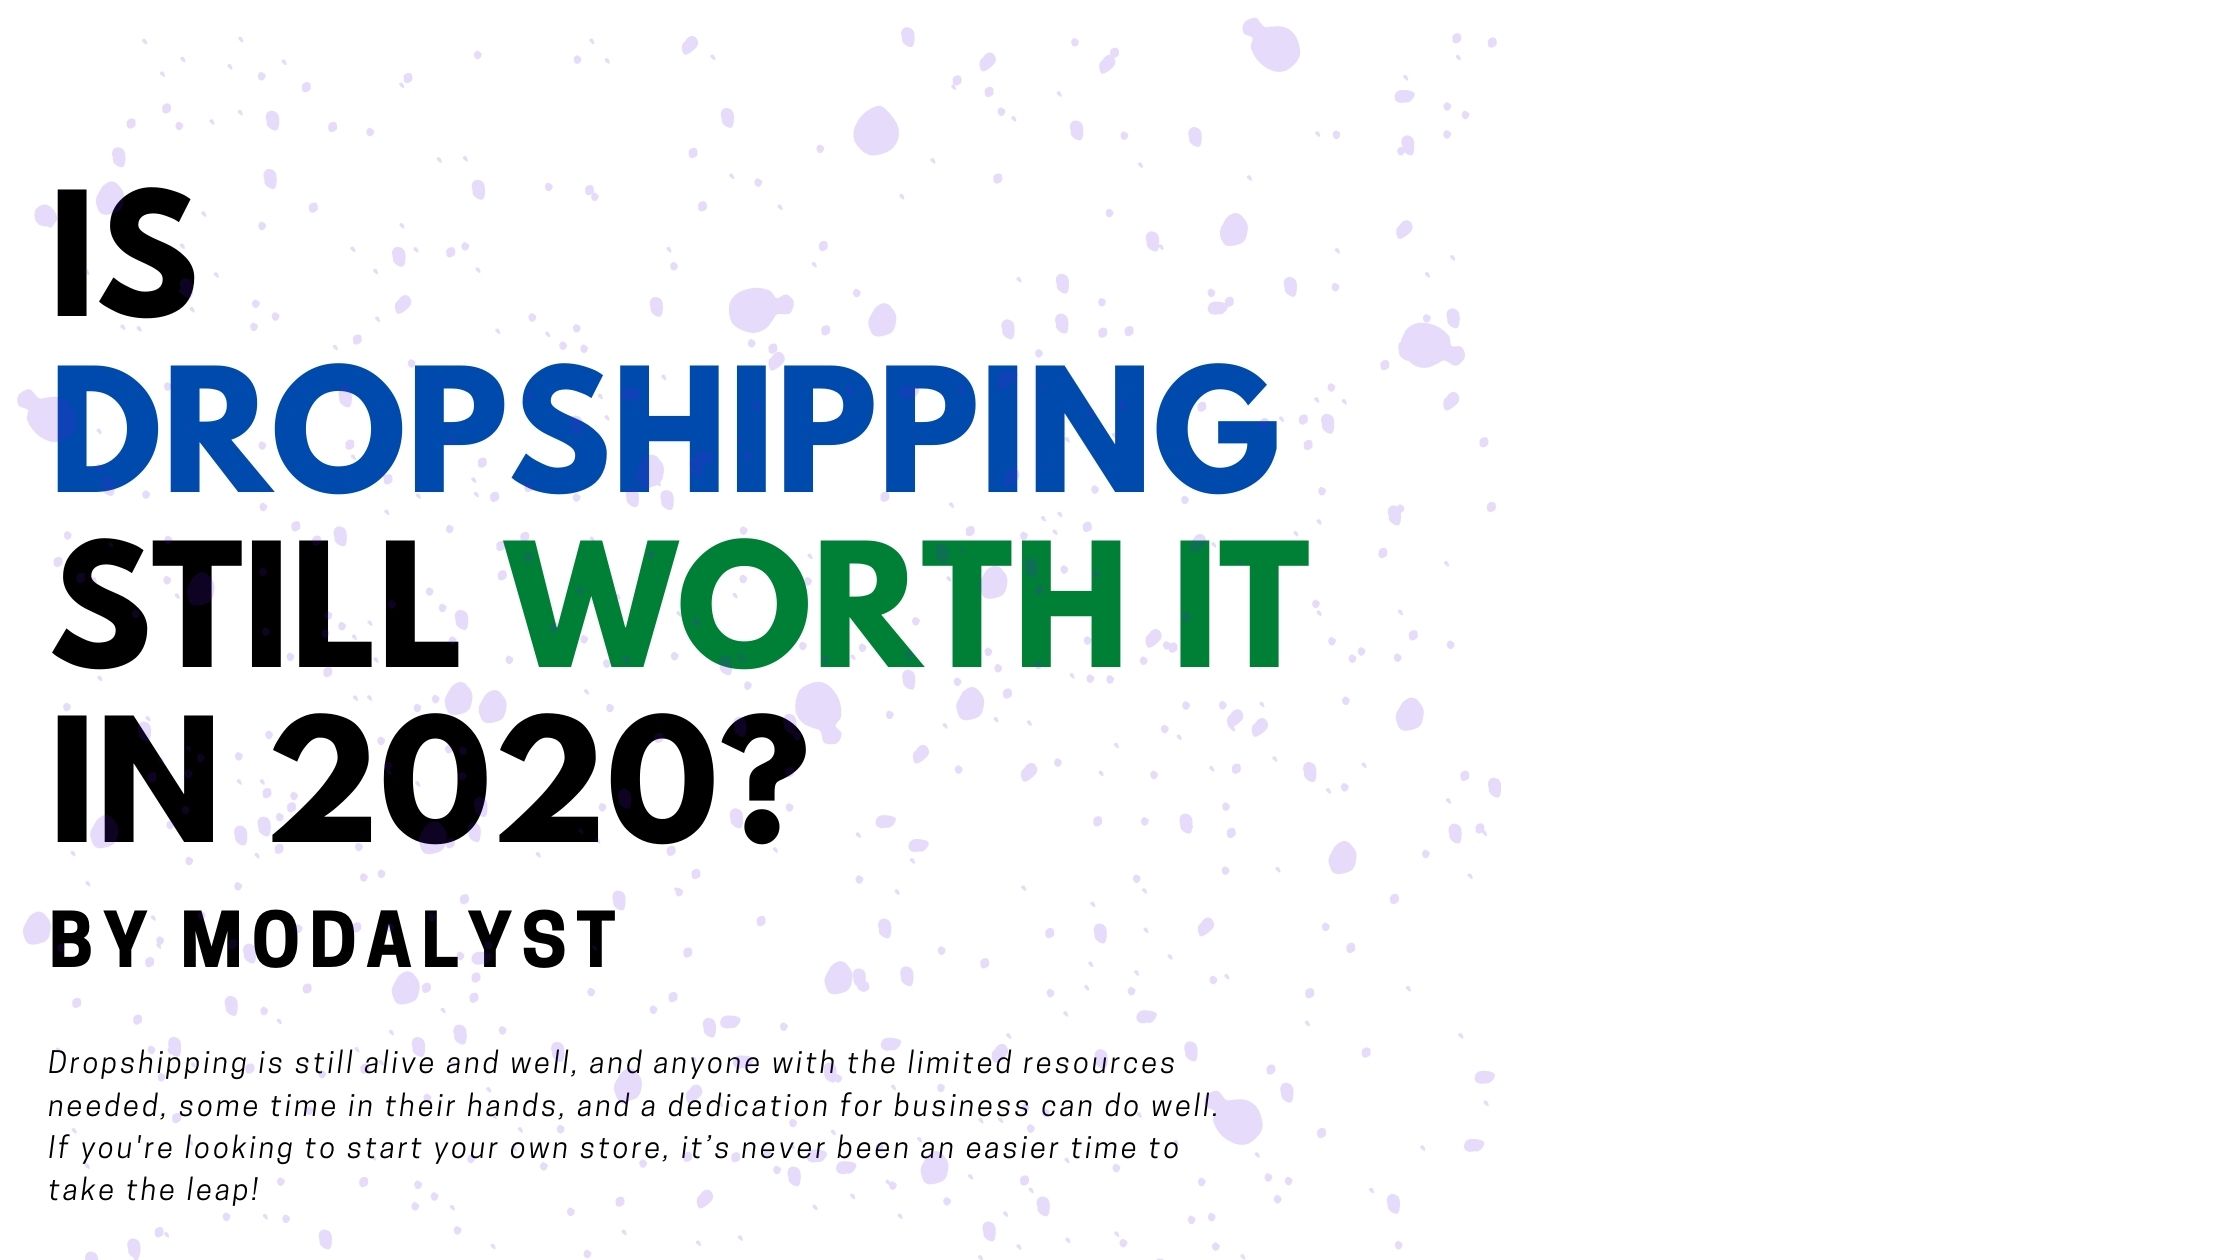 Is dropshipping worth it?